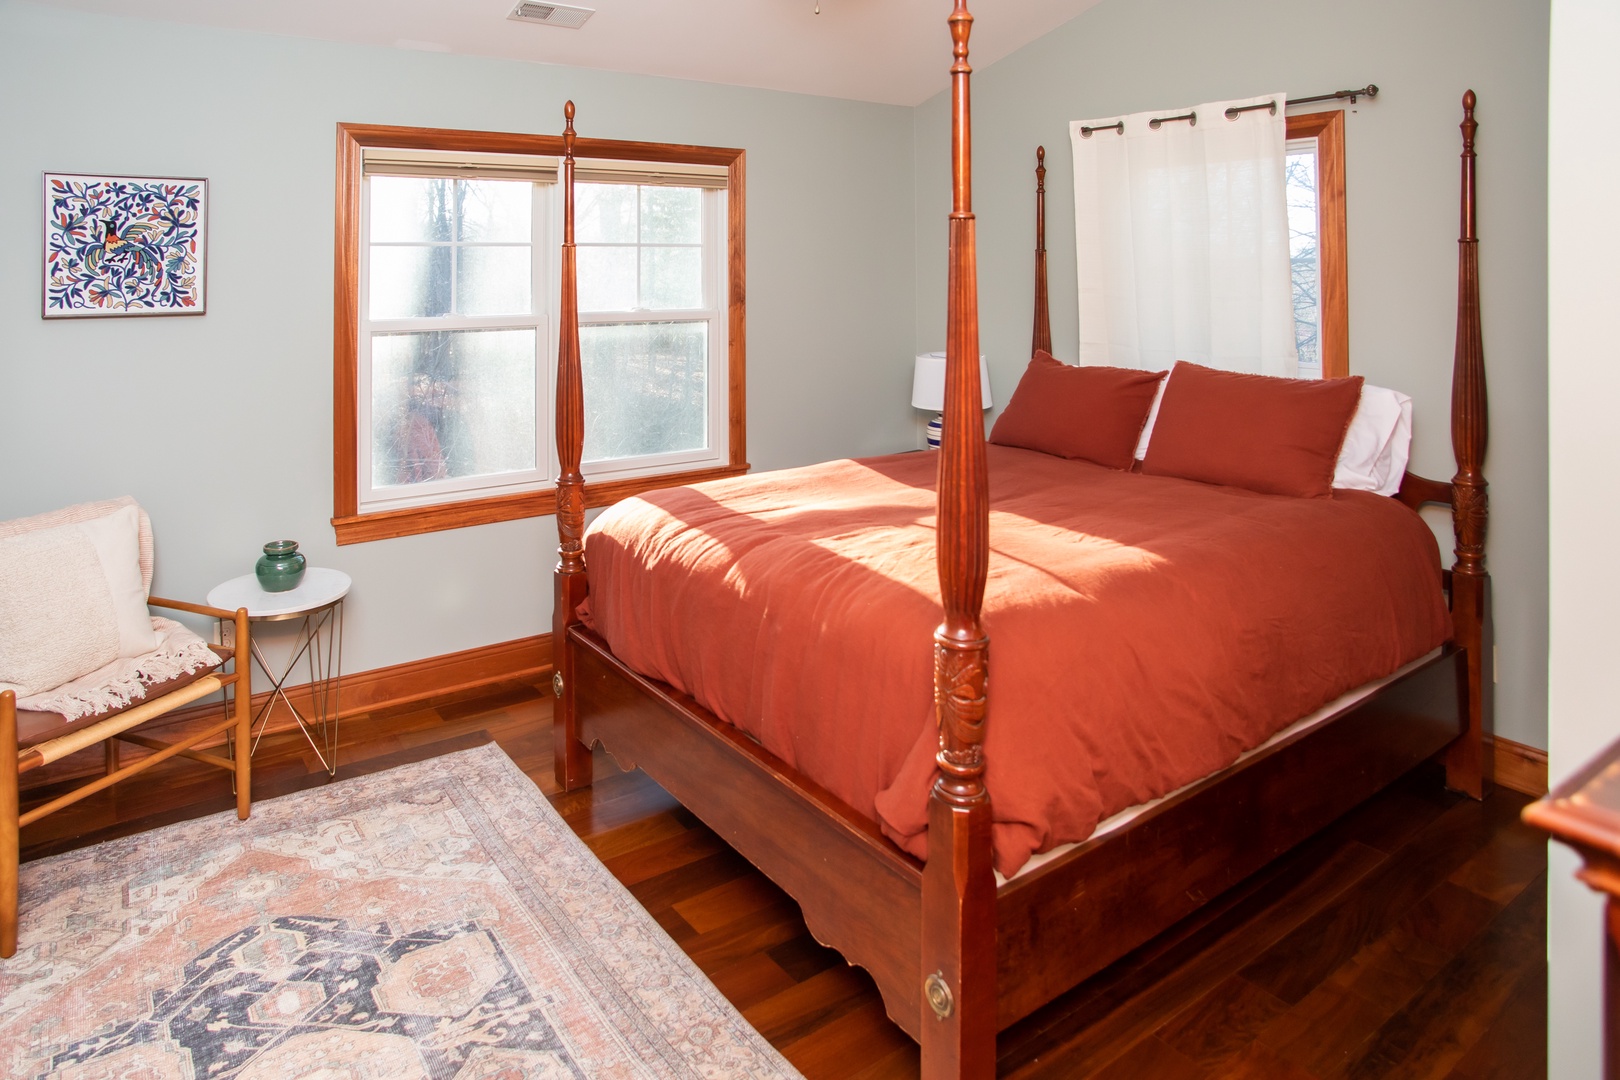 Classic style and comfort can be found in all six bedrooms.